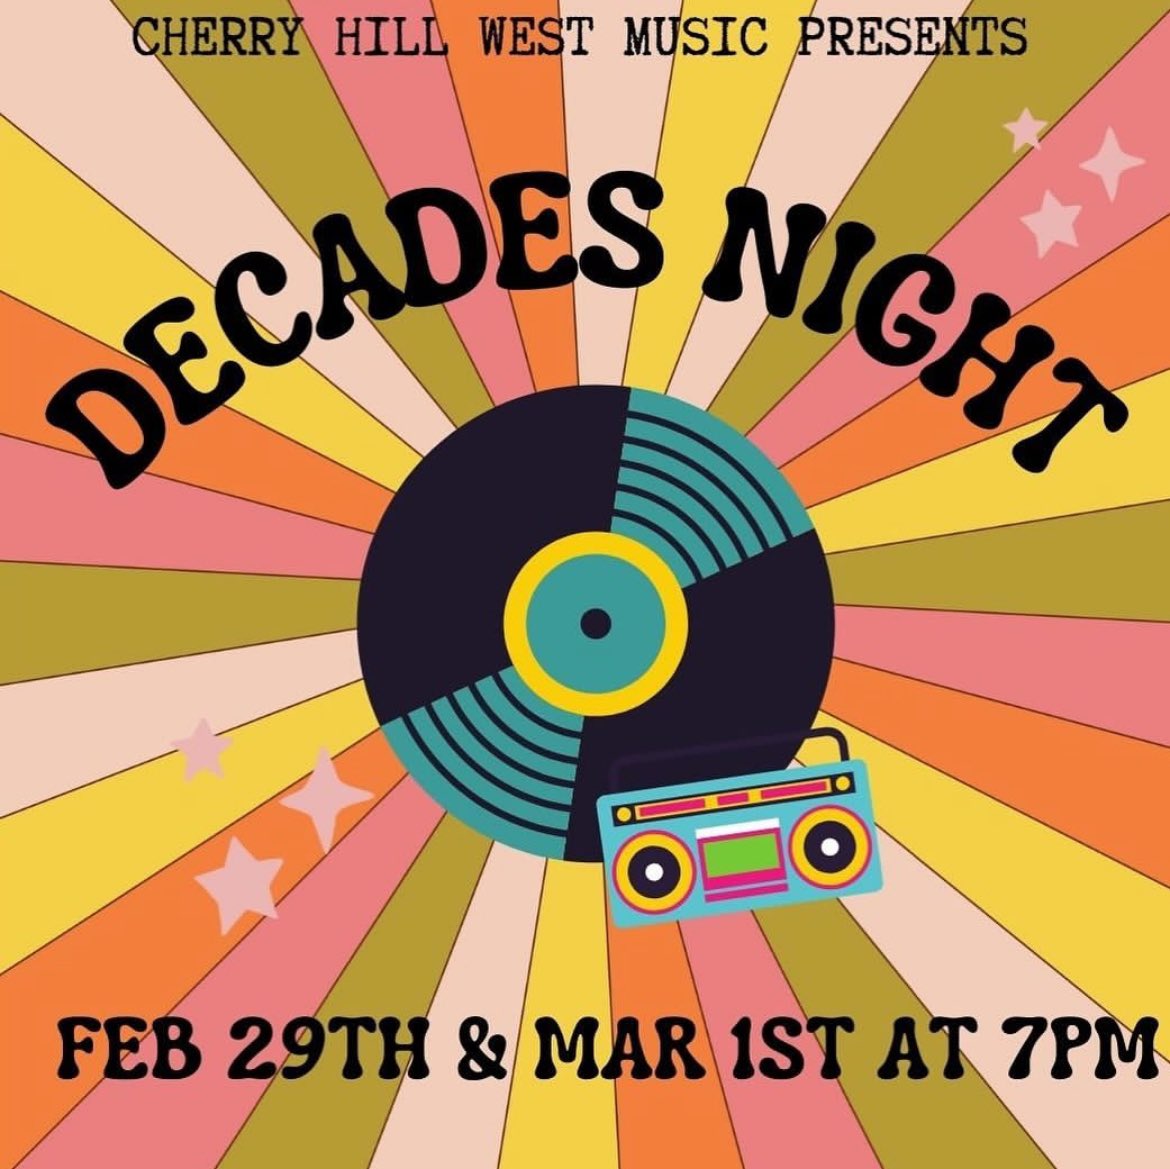 Come check out Decades Night this Thursday and Friday in the West Auditorium! Featuring music from the 1930’s-2020’s and featuring all choir and instrumental groups! Tickets are just $10!